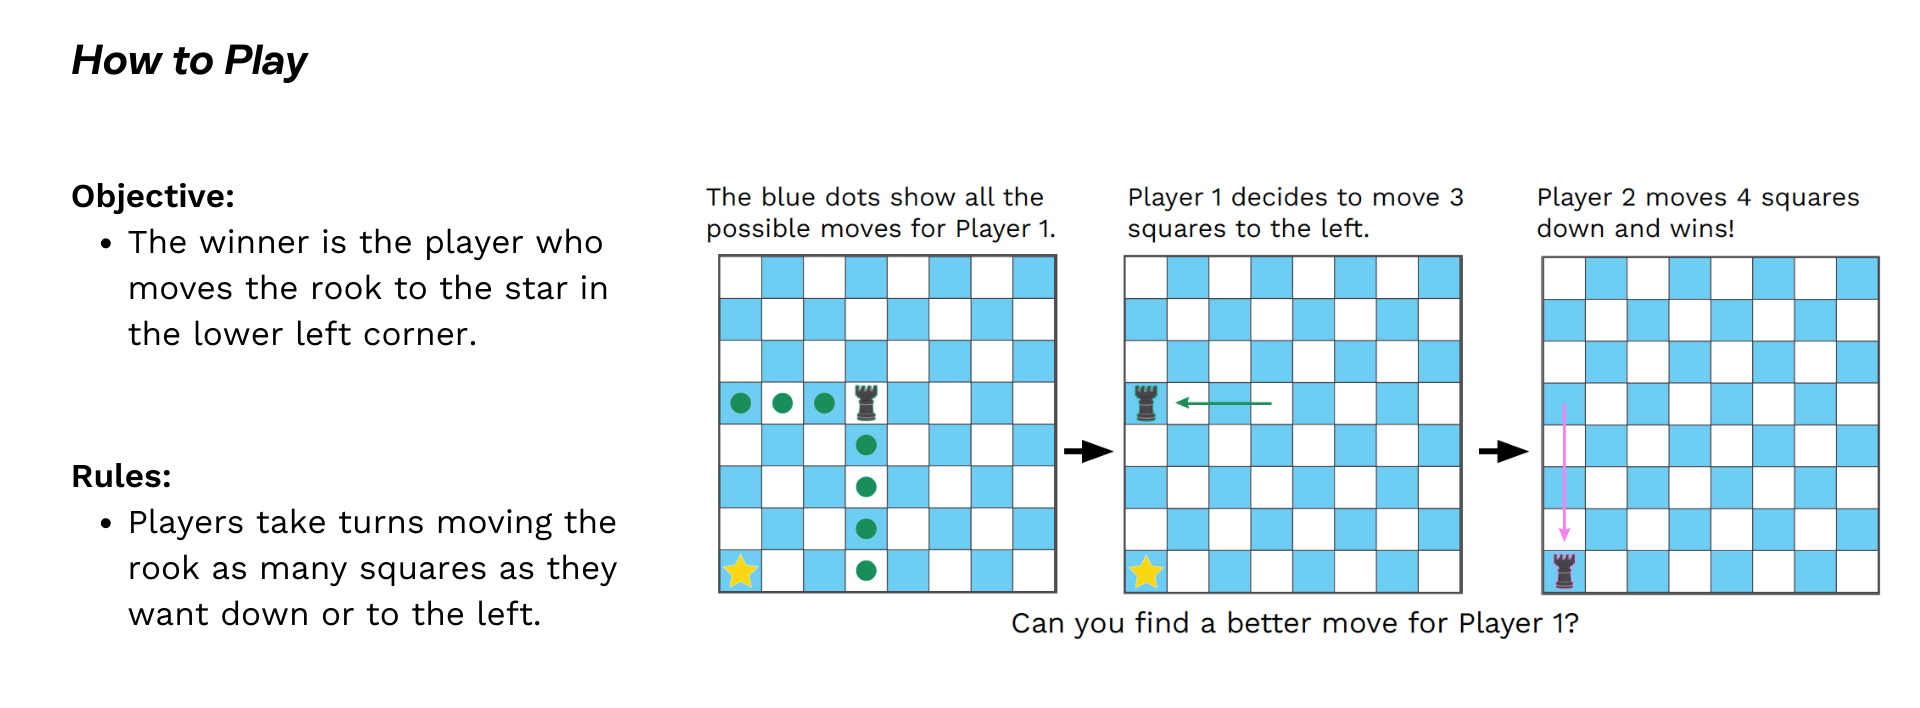 Objective: The winner is the player who moves the rook to the star in the lower left corner.